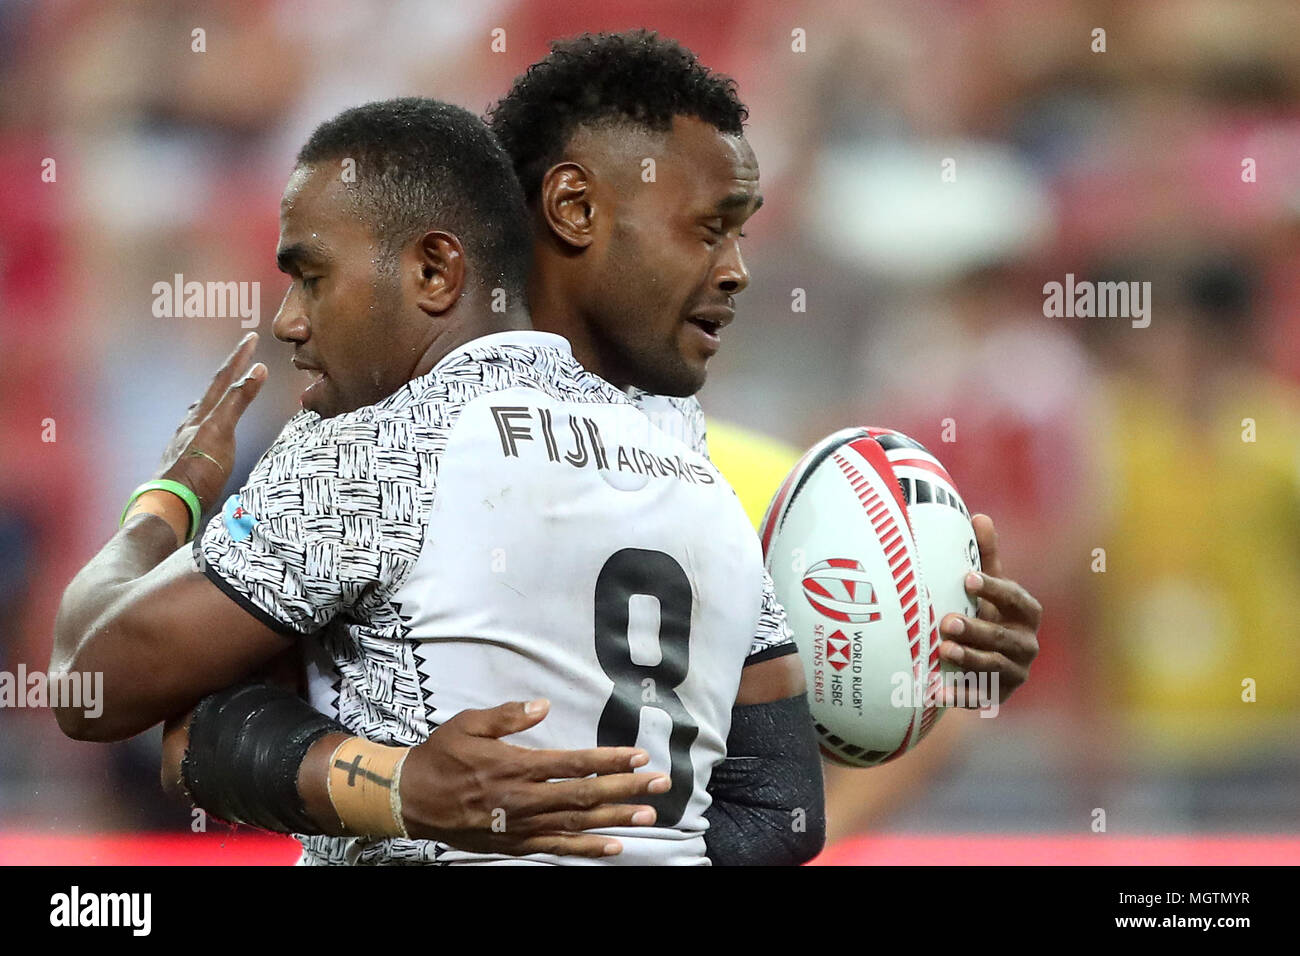 Singapore. 29th Apr, 2018. Waisea Nacuqu (left) of Fiji is embraced by Eroni Say after scoring a try during the Cup Final match between Fiji and Australia at the Rugby Sevens tournament at the National Stadium. Singapore. Credit: Paul Miller/ZUMA Wire/Alamy Live News Stock Photo